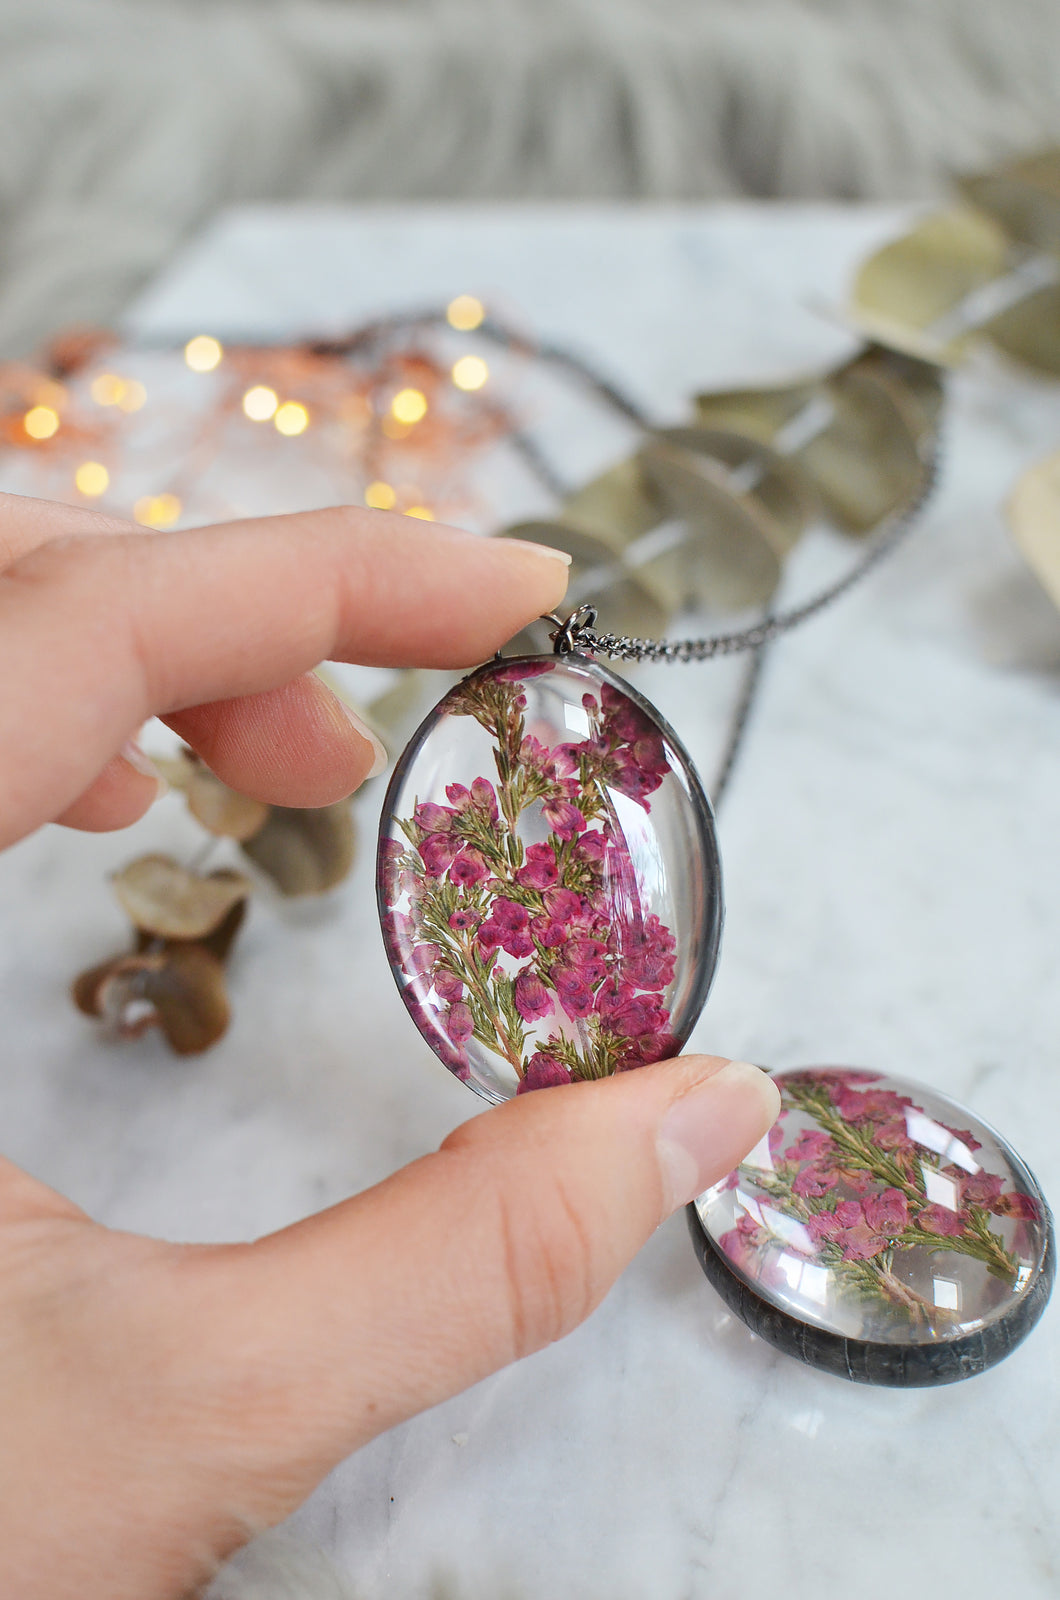 (Wholesale) of Pink heather flower glass pendant